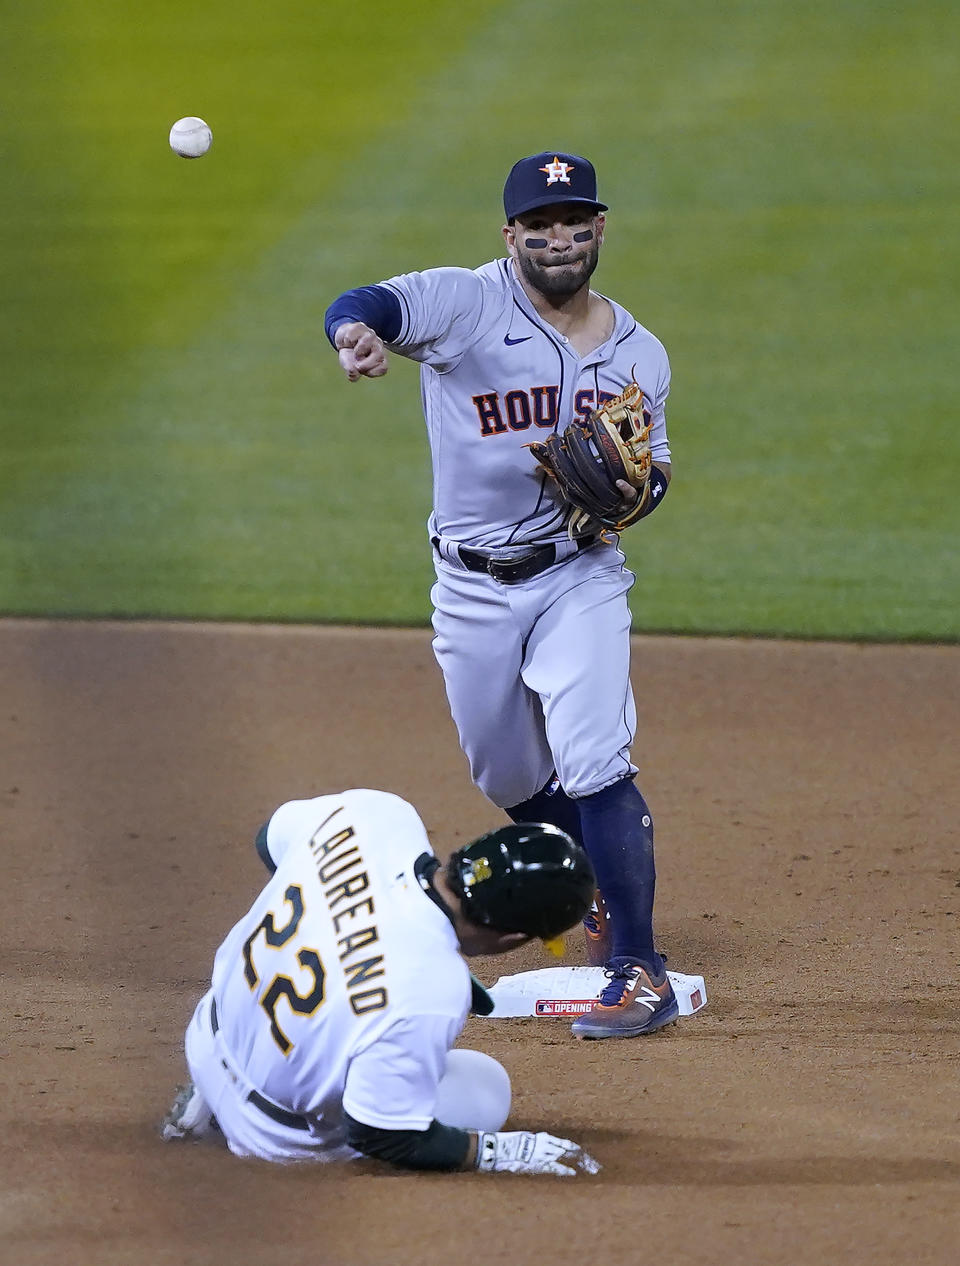 Houston Astros second baseman Jose Altuve (27) throws to first for the double play on a ball hit by Oakland Athletics' Matt Chapman (not shw=own) after forcing Ramon Laureano (22) out at second during the fourth inning of a baseball game in Oakland, Calif., Thursday, April 1, 2021. (AP Photo/Tony Avelar)